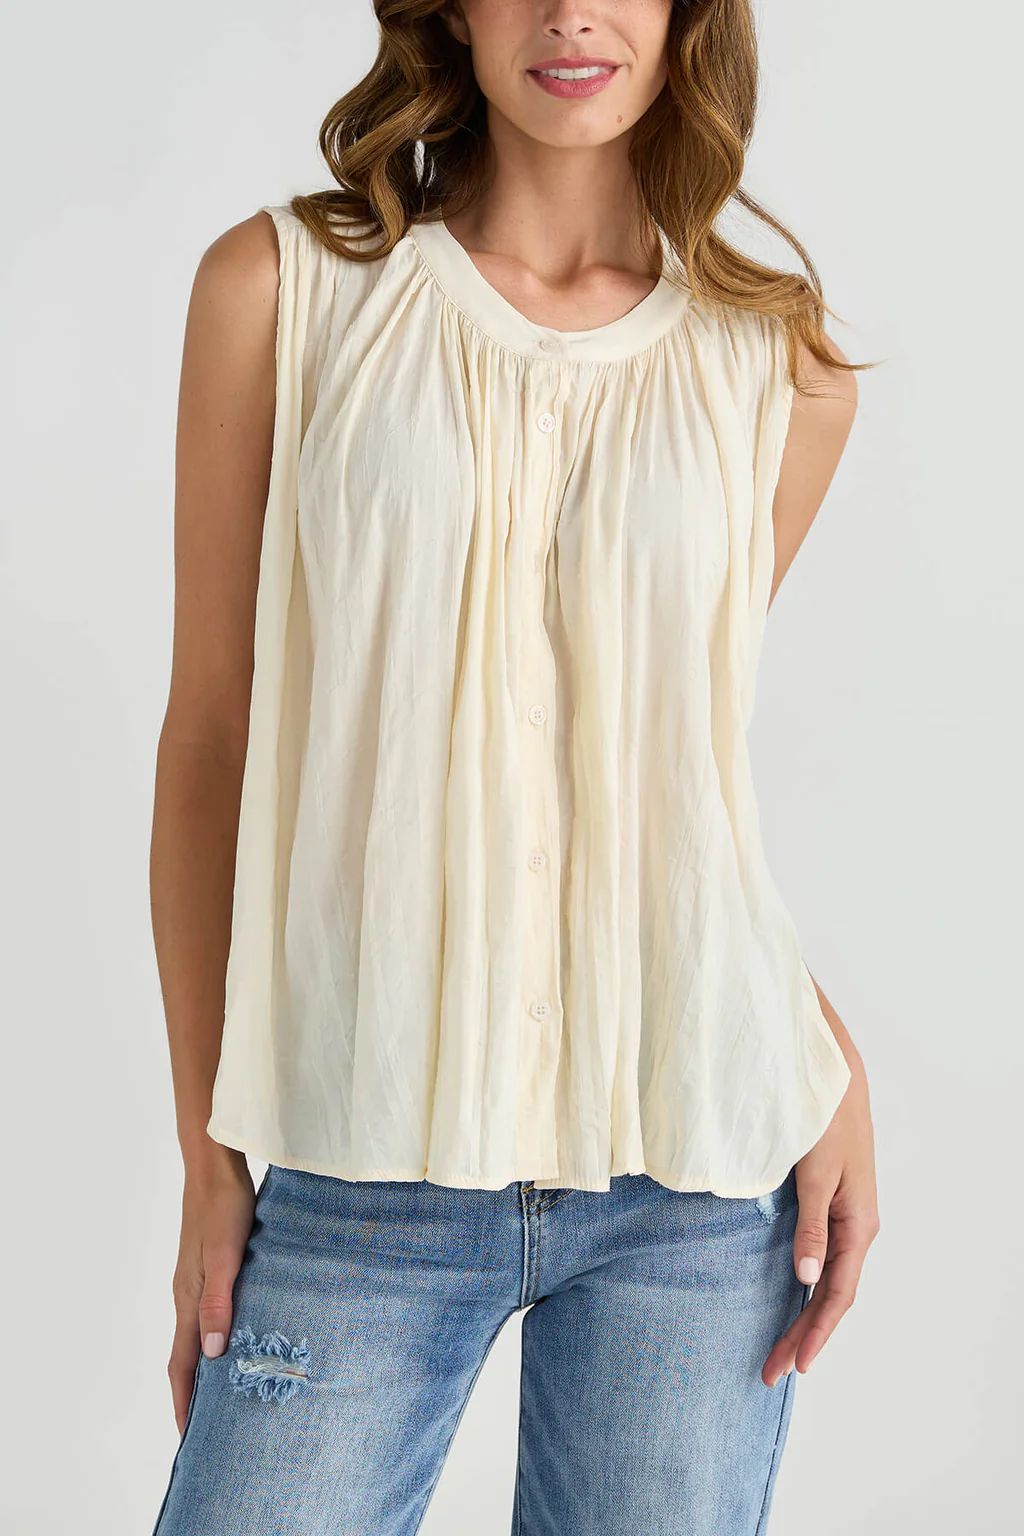 By Together Sleeveless Button Front Top | Social Threads